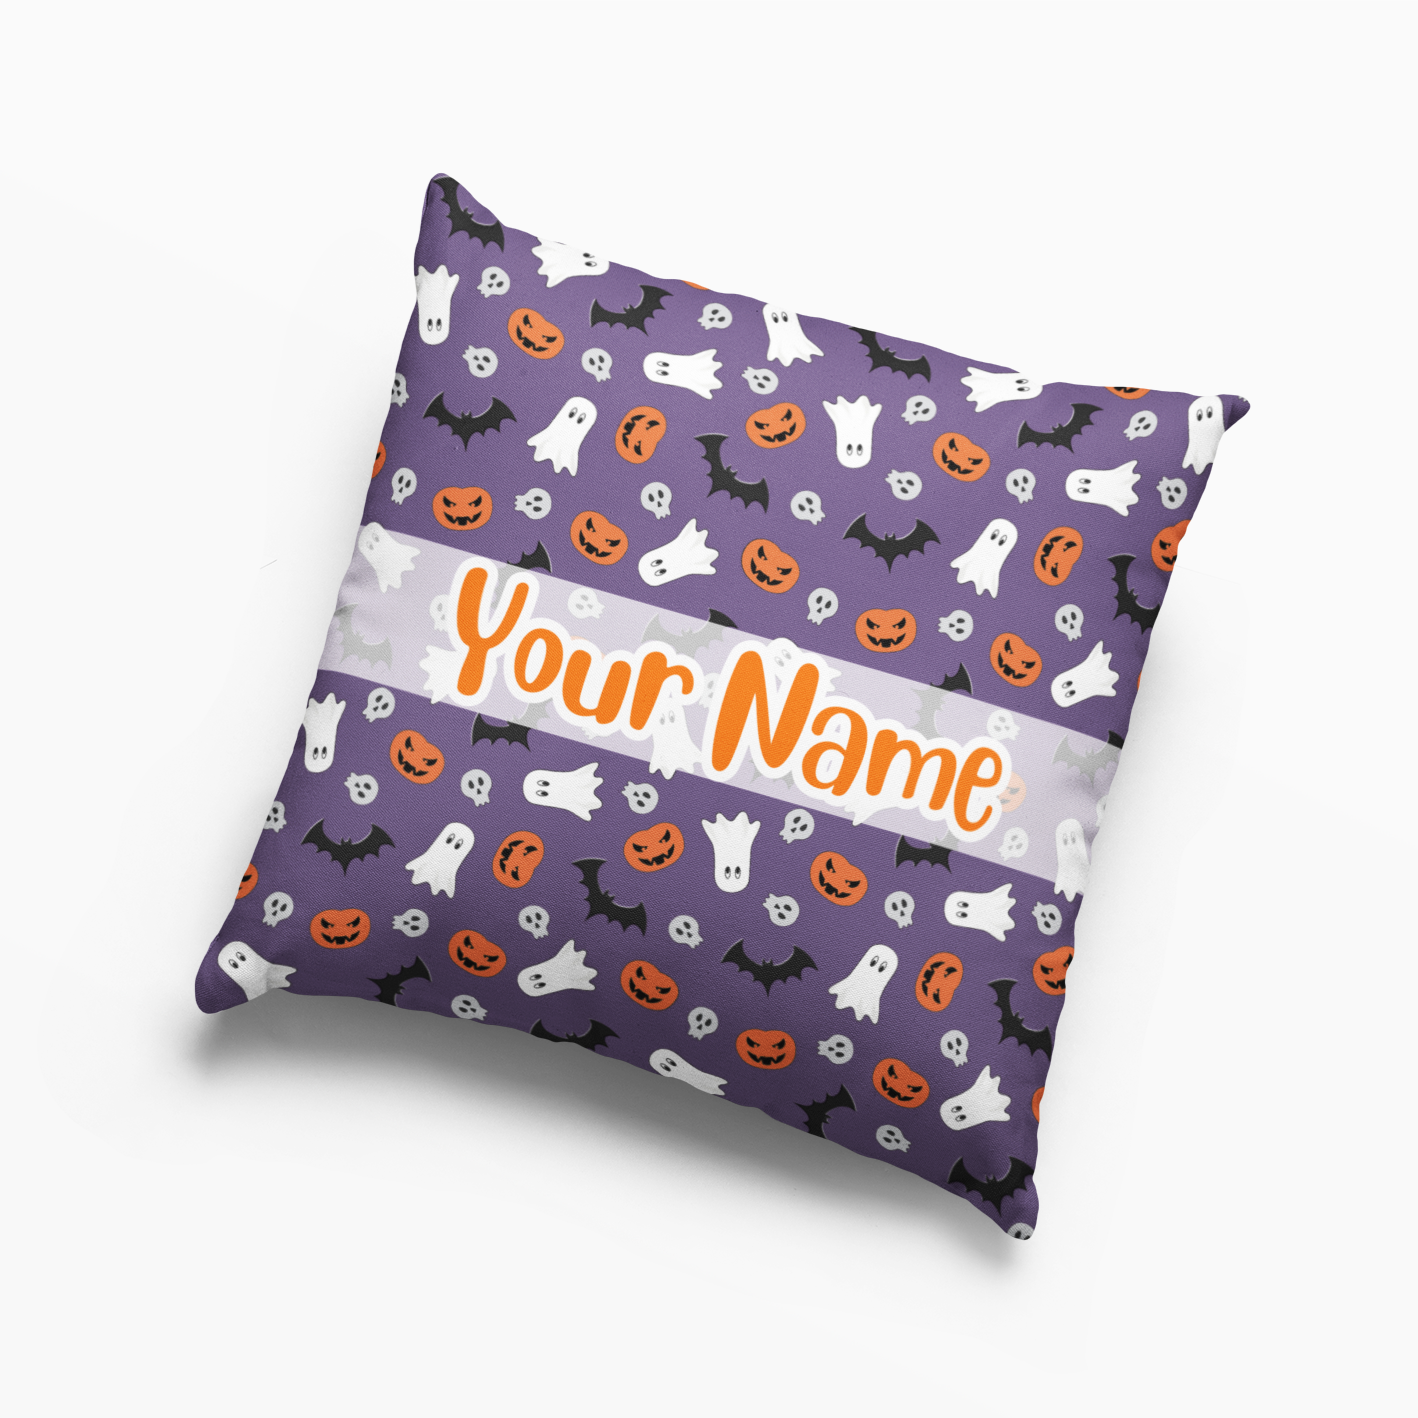 Funny Halloween Pillow personalized Pillow with Your name #3 Pillow Case